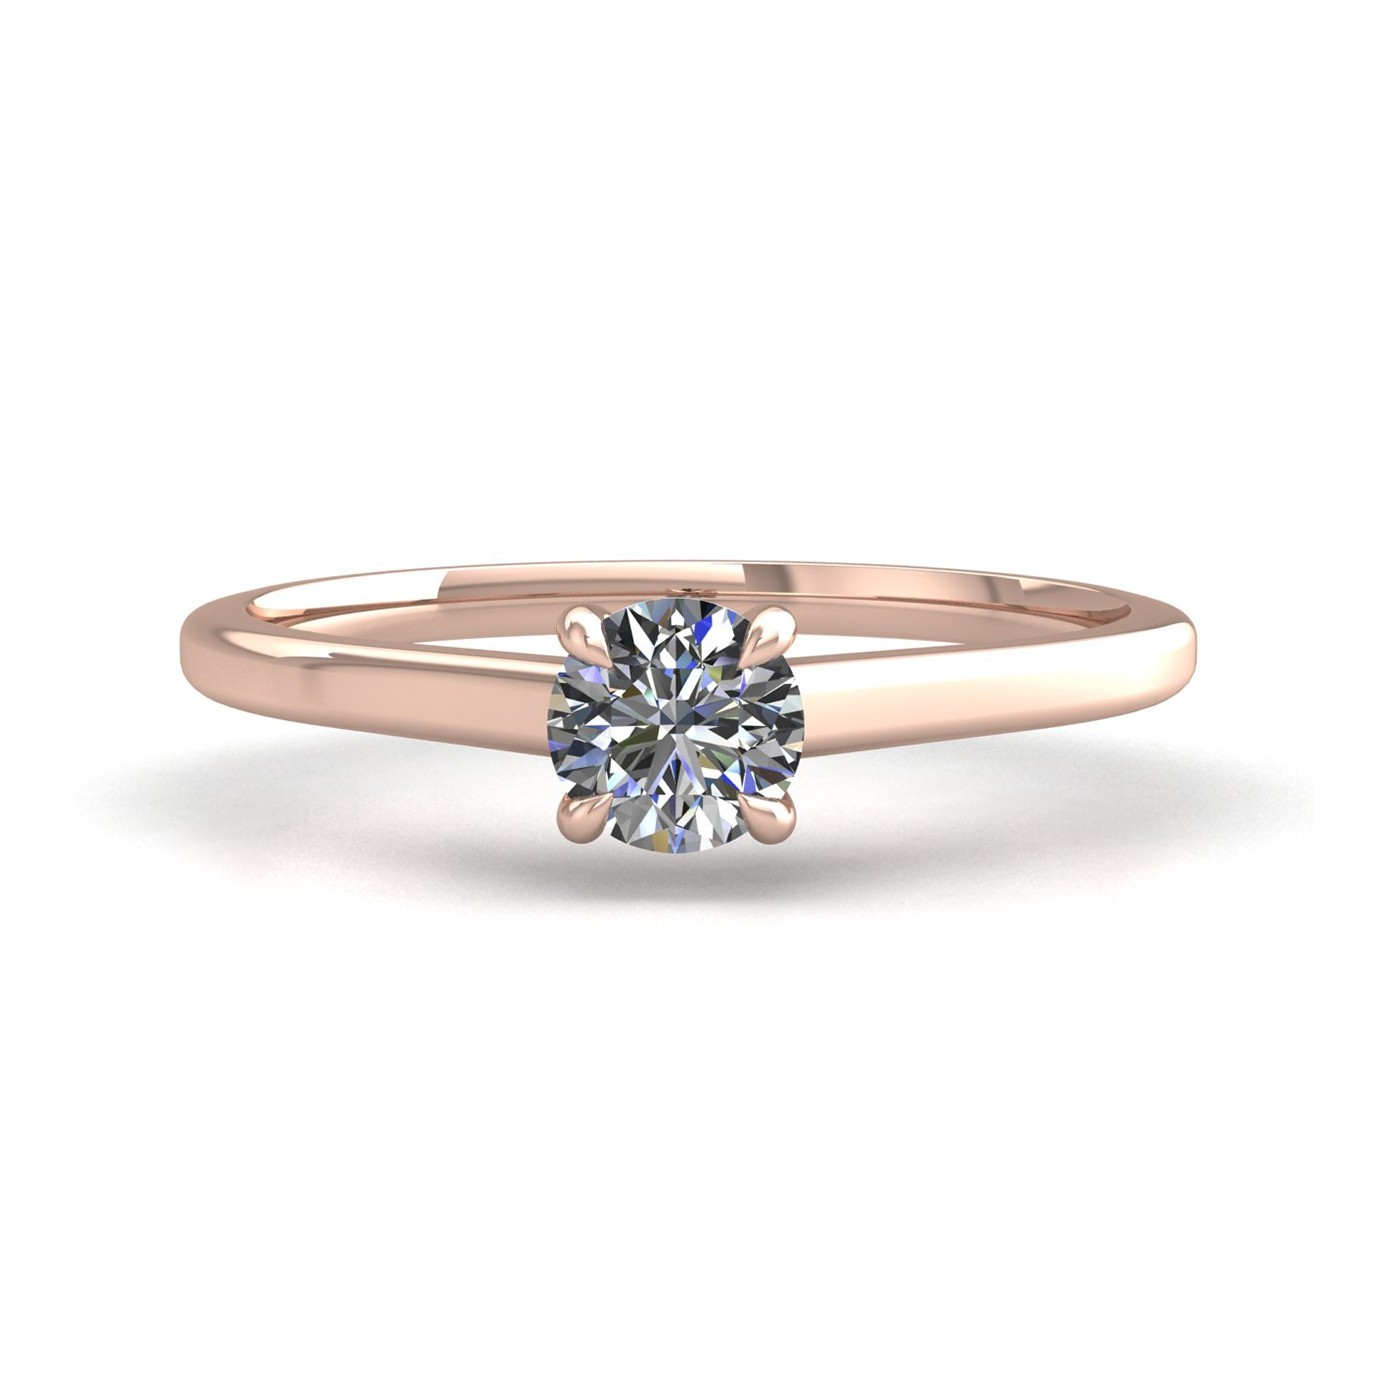 18k rose gold 1.5ct 4 prongs solitaire round cut diamond engagement ring with whisper thin band Photos & images